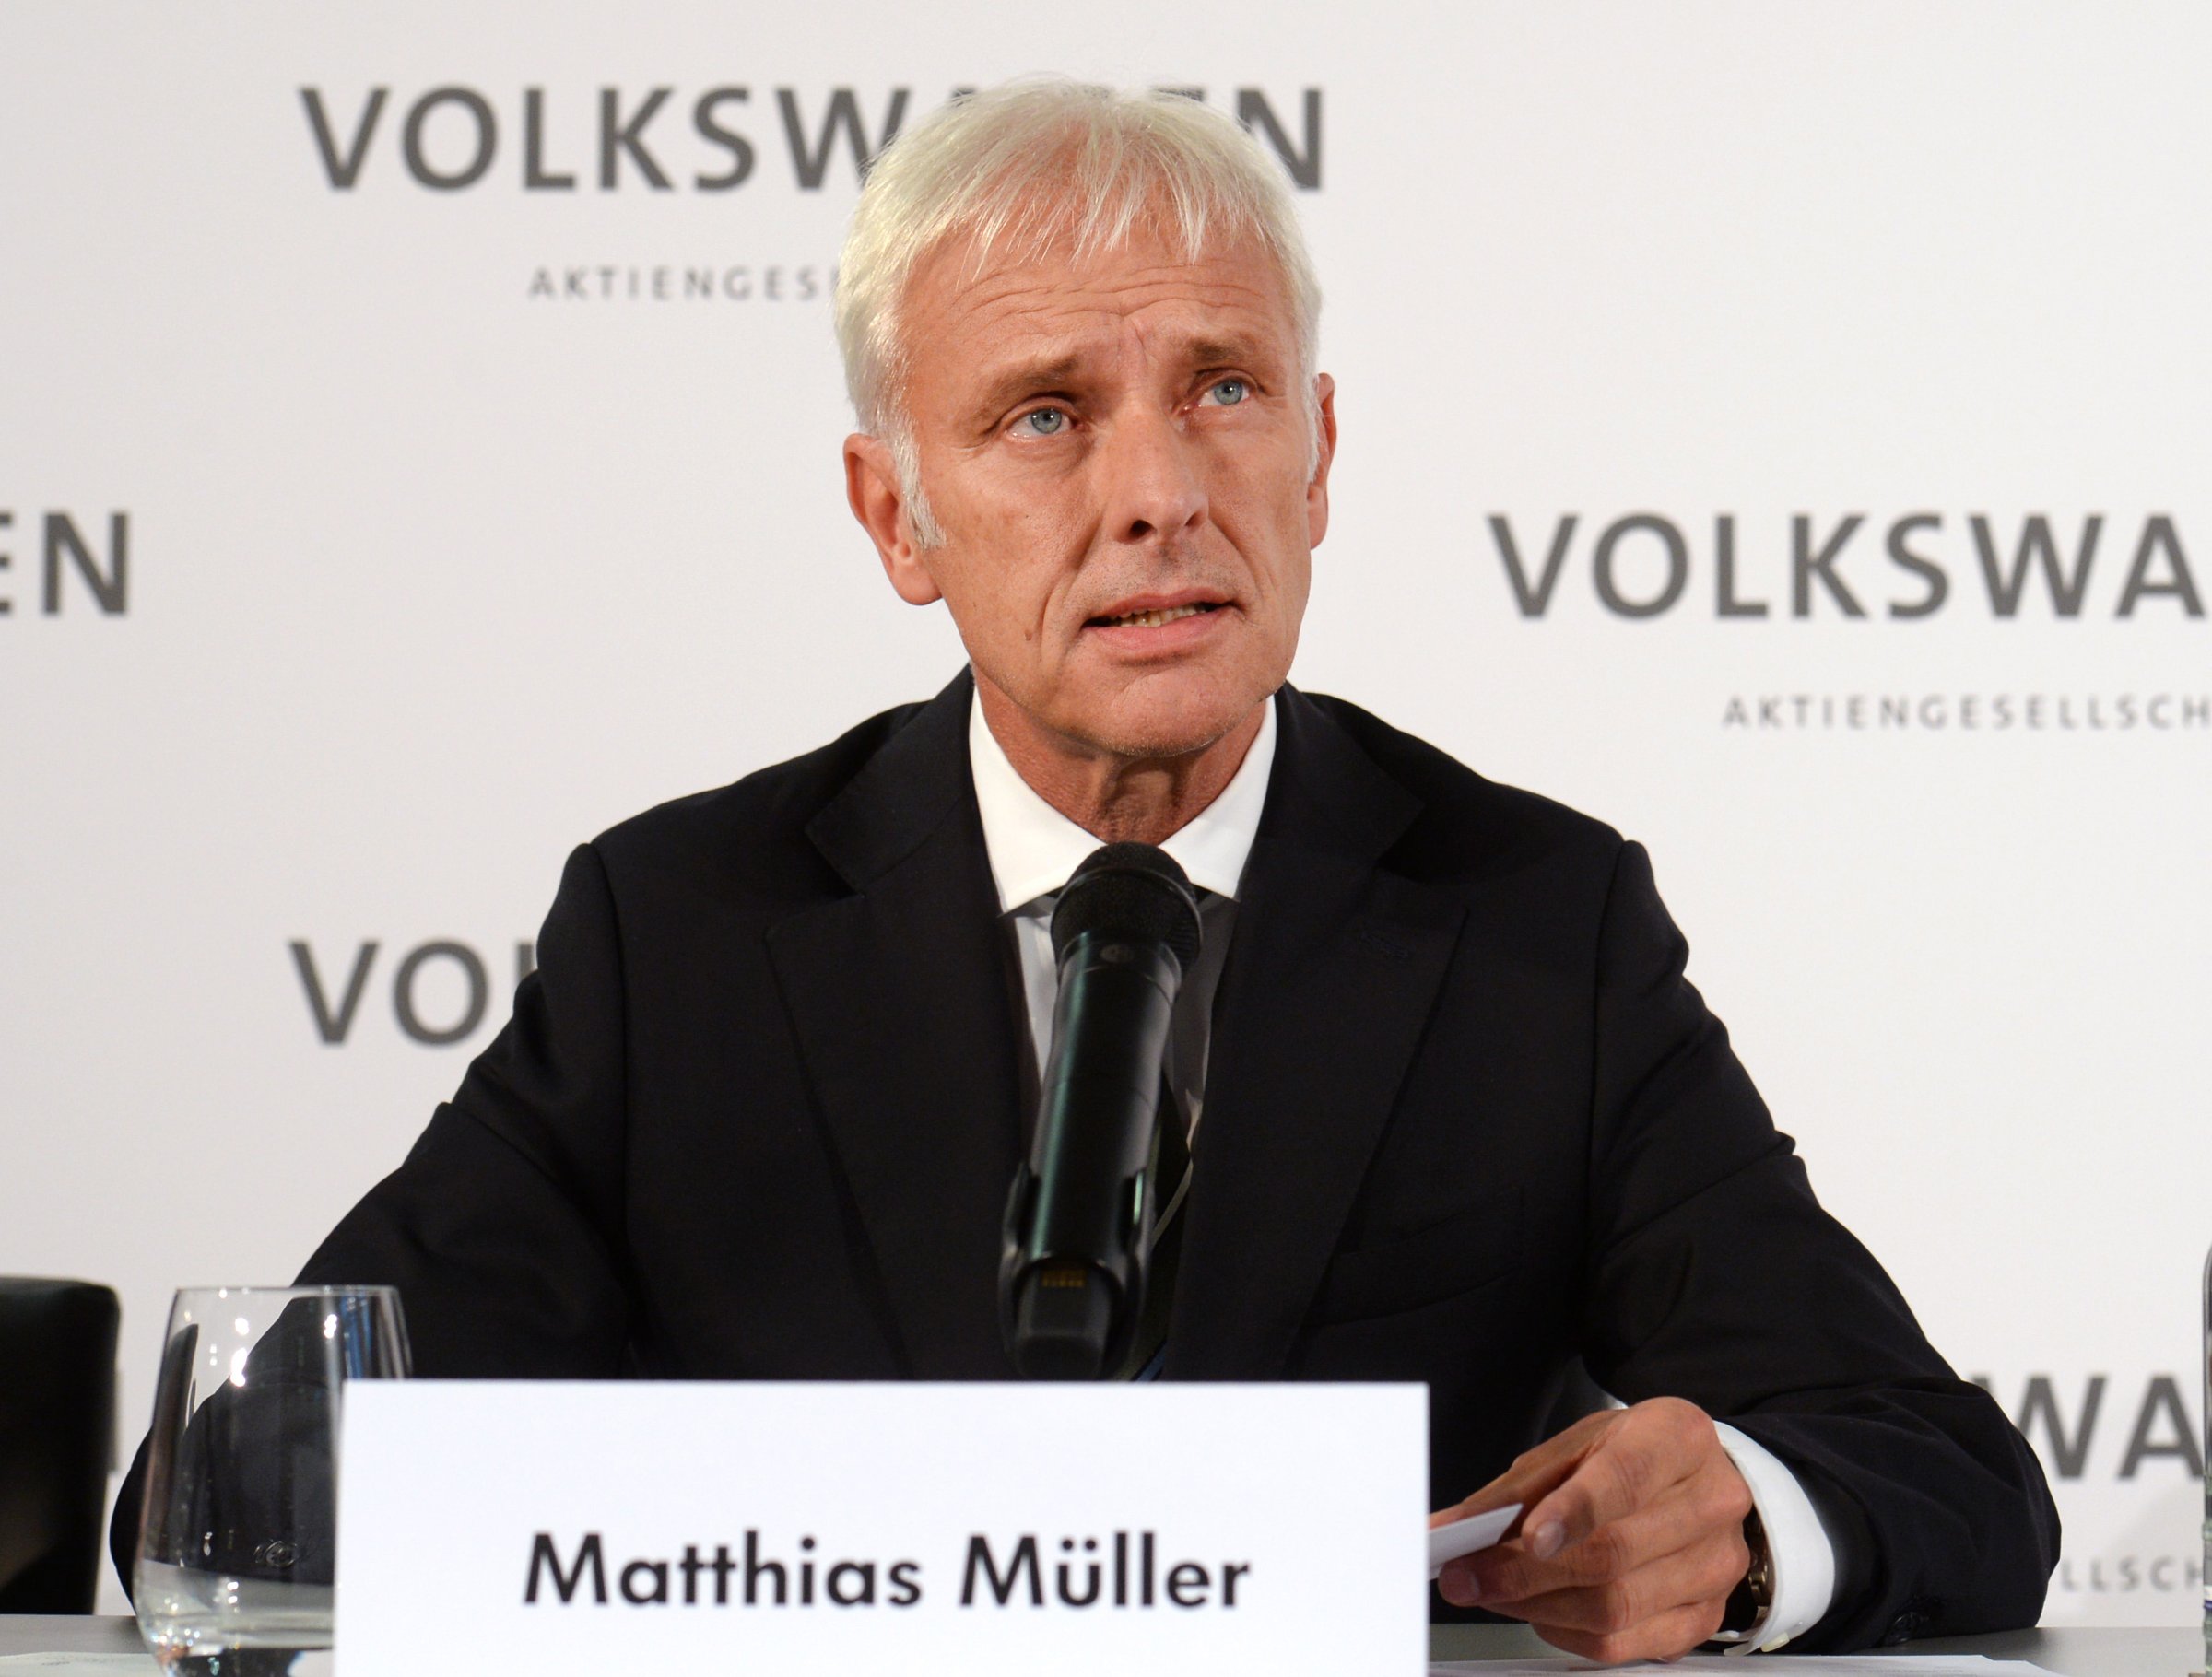 Matthias Mueller, the new chief executive of Volkswagen AG, holds a press conference at the VW factory in in Wolfsburg, Germany, 25 September 2015.